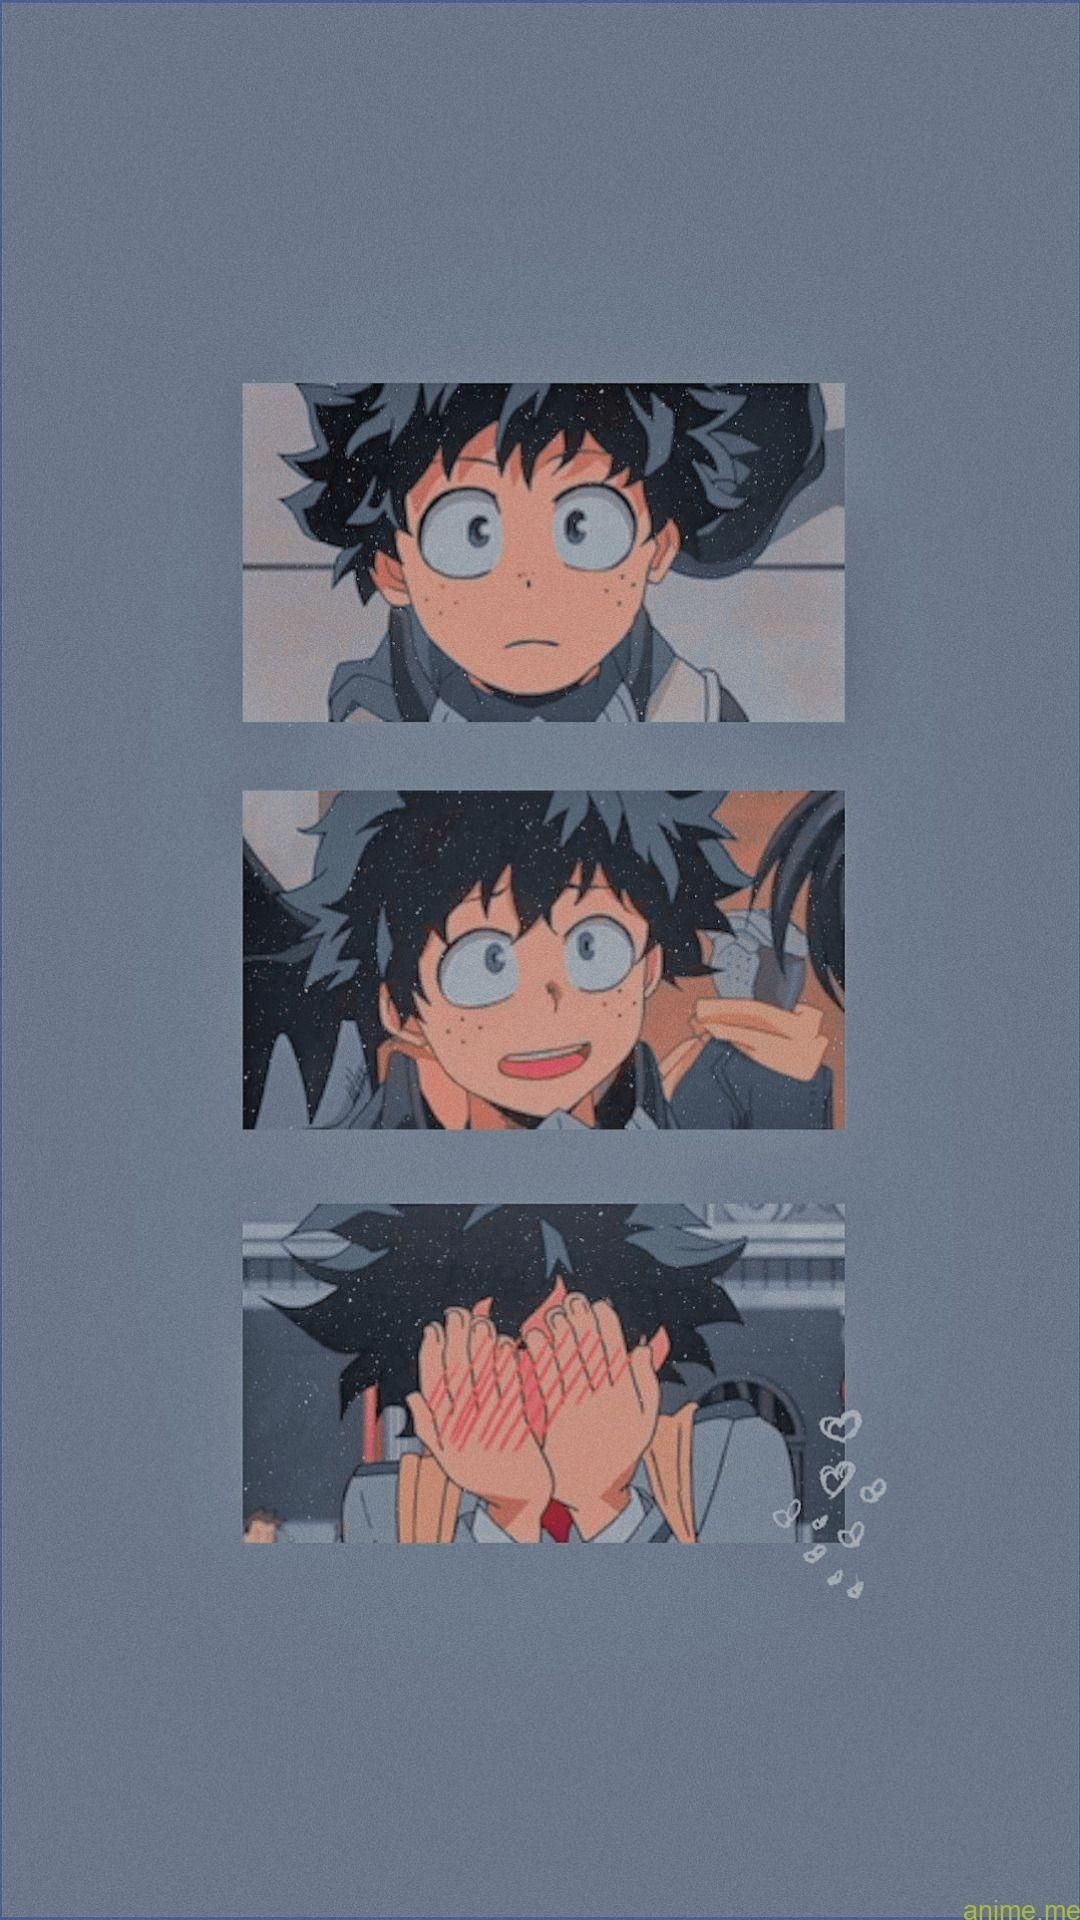 Download Aesthetic Anime Boy Icon Blue Lights Wallpaper | Wallpapers.com